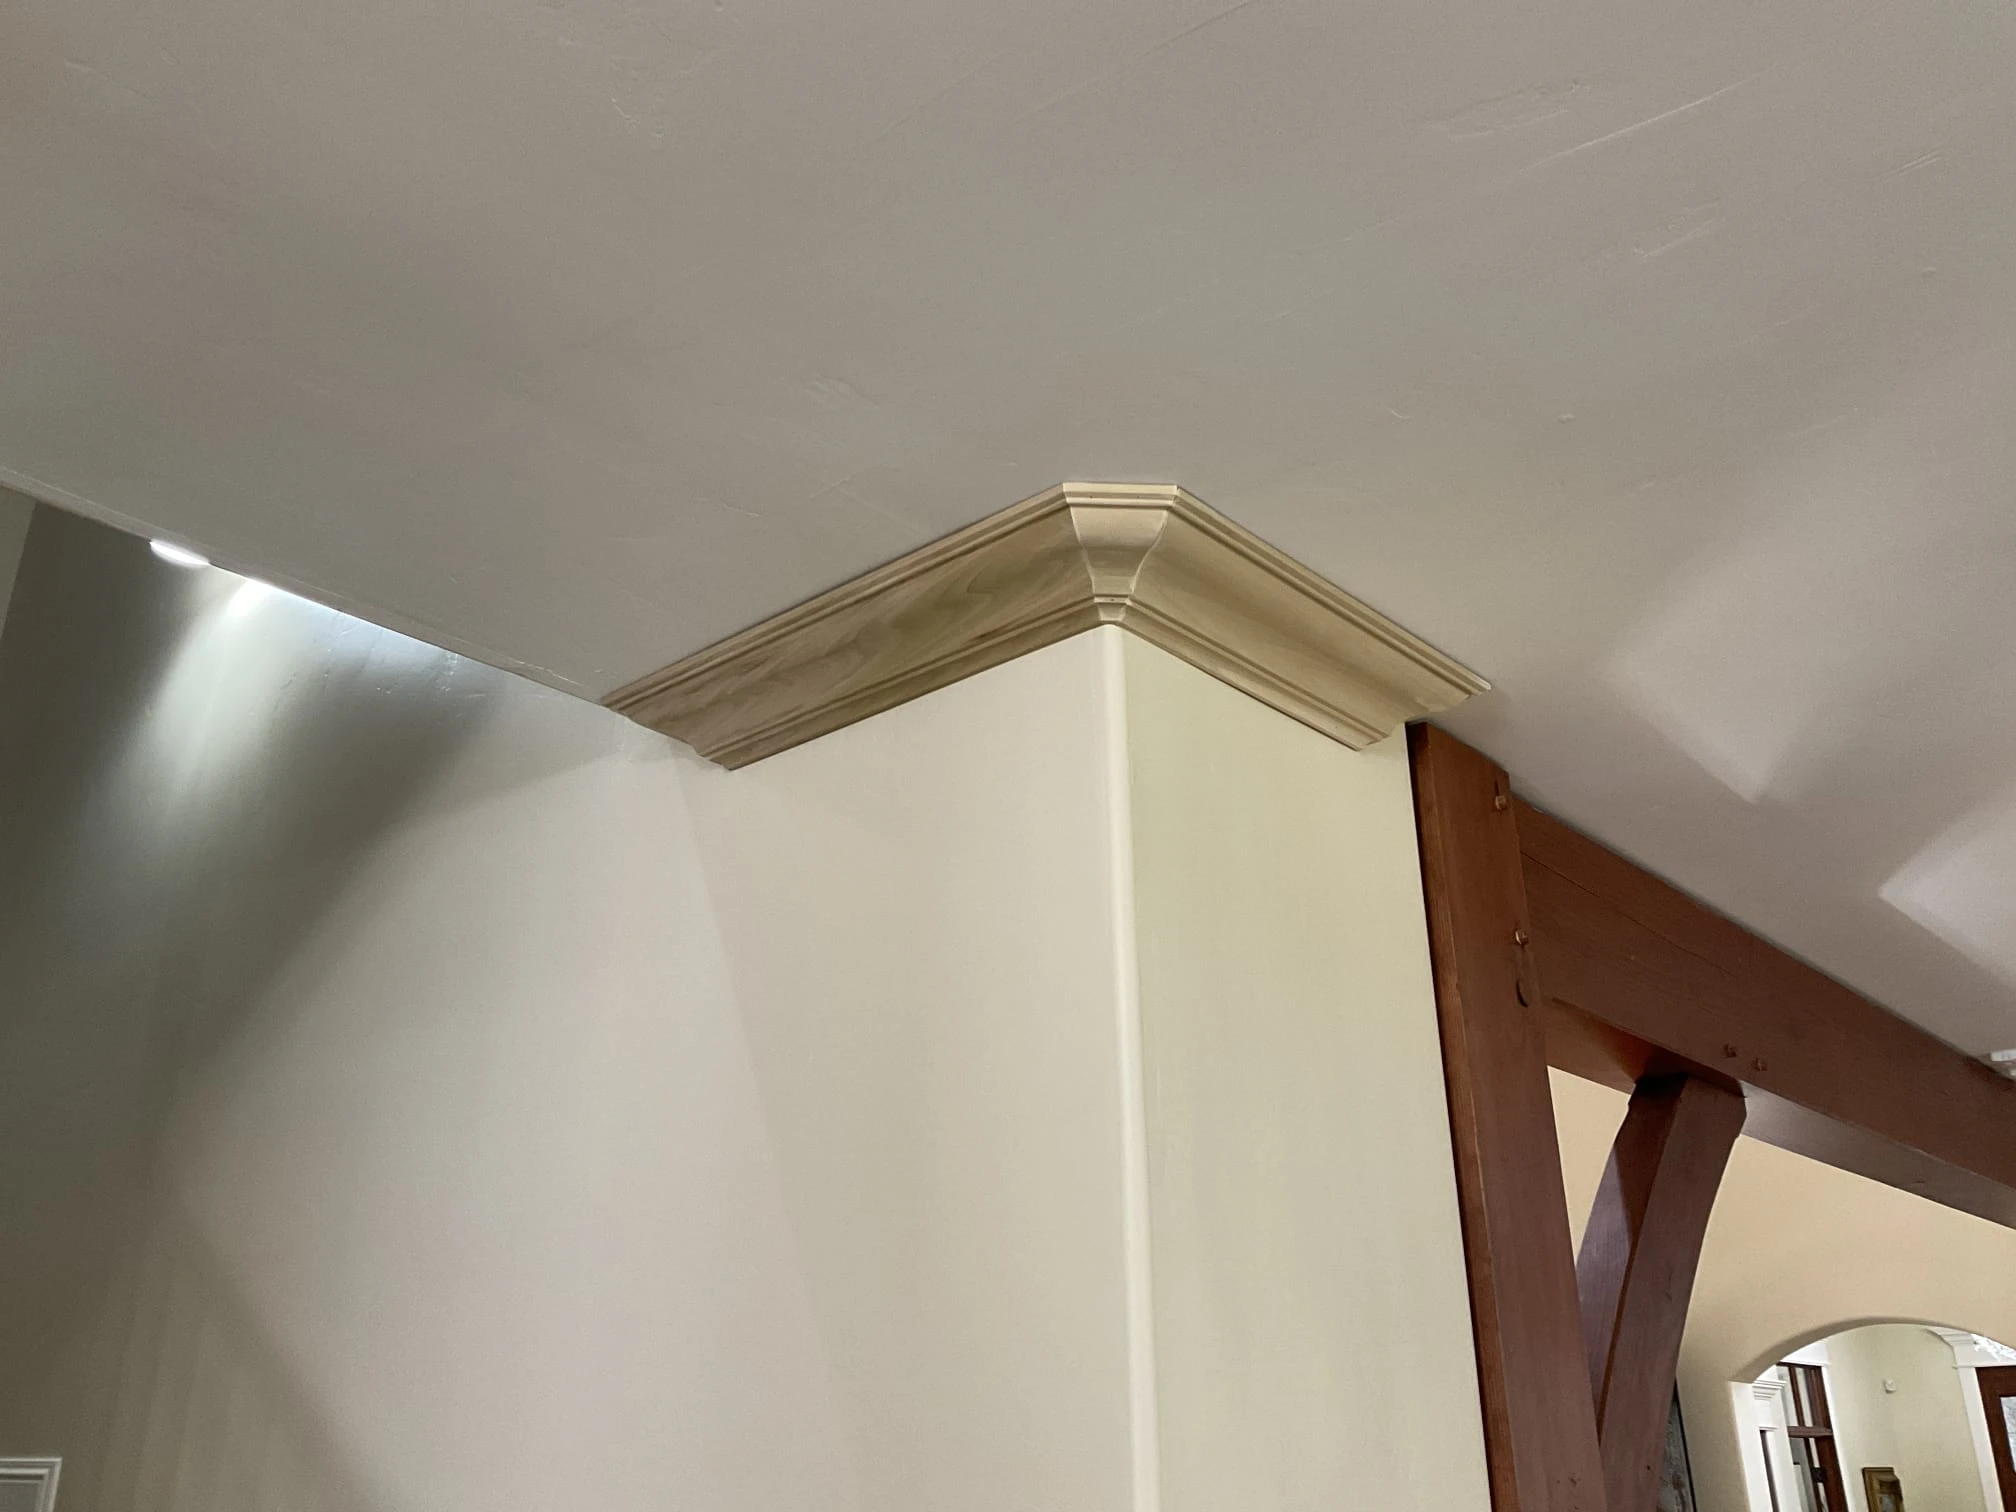 New crown molding on the top corner of a wall in a home that has received professional installation services for finish carpentry in Lehi, UT.